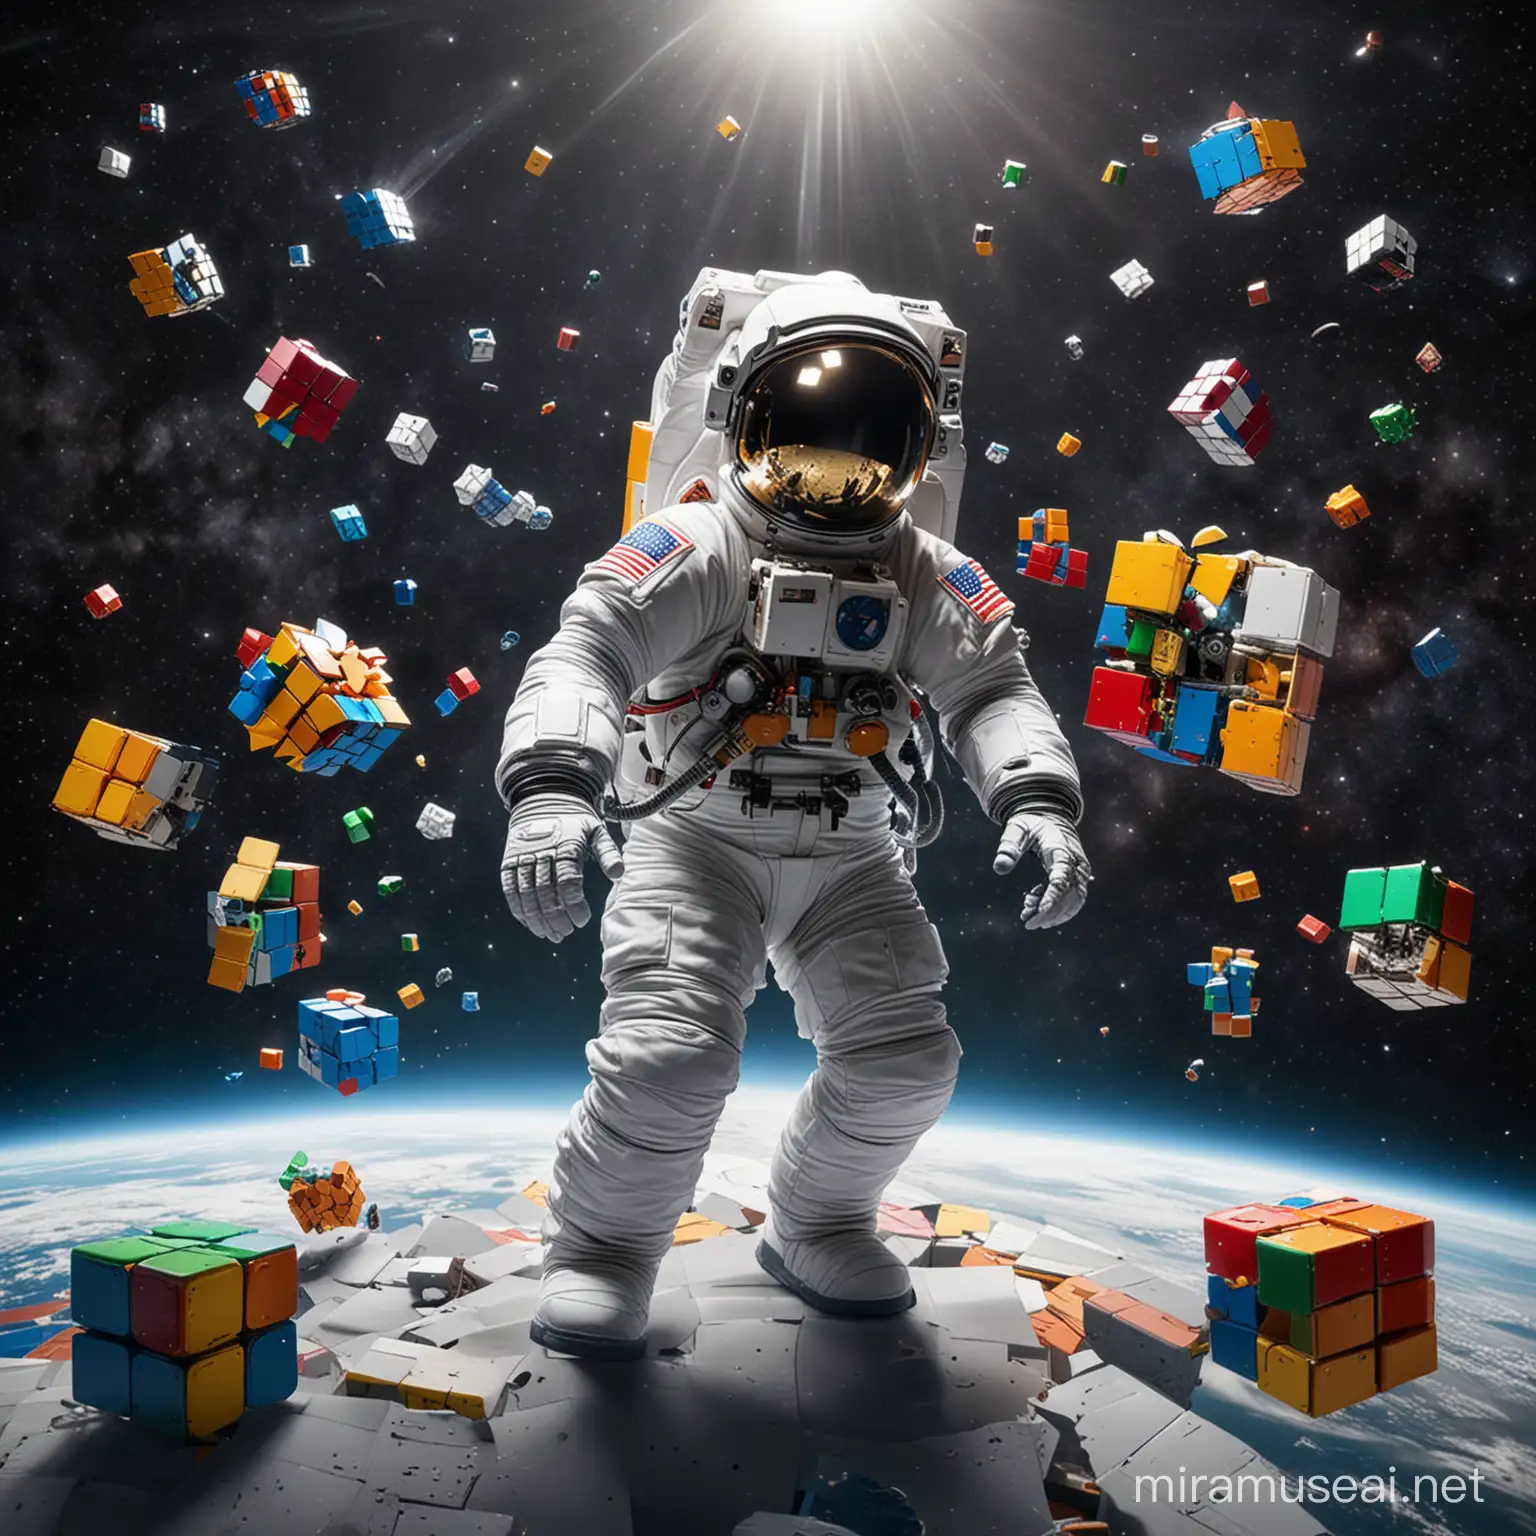 Toy astronaut in space with lots of real Rubik's cube puzzles around him
